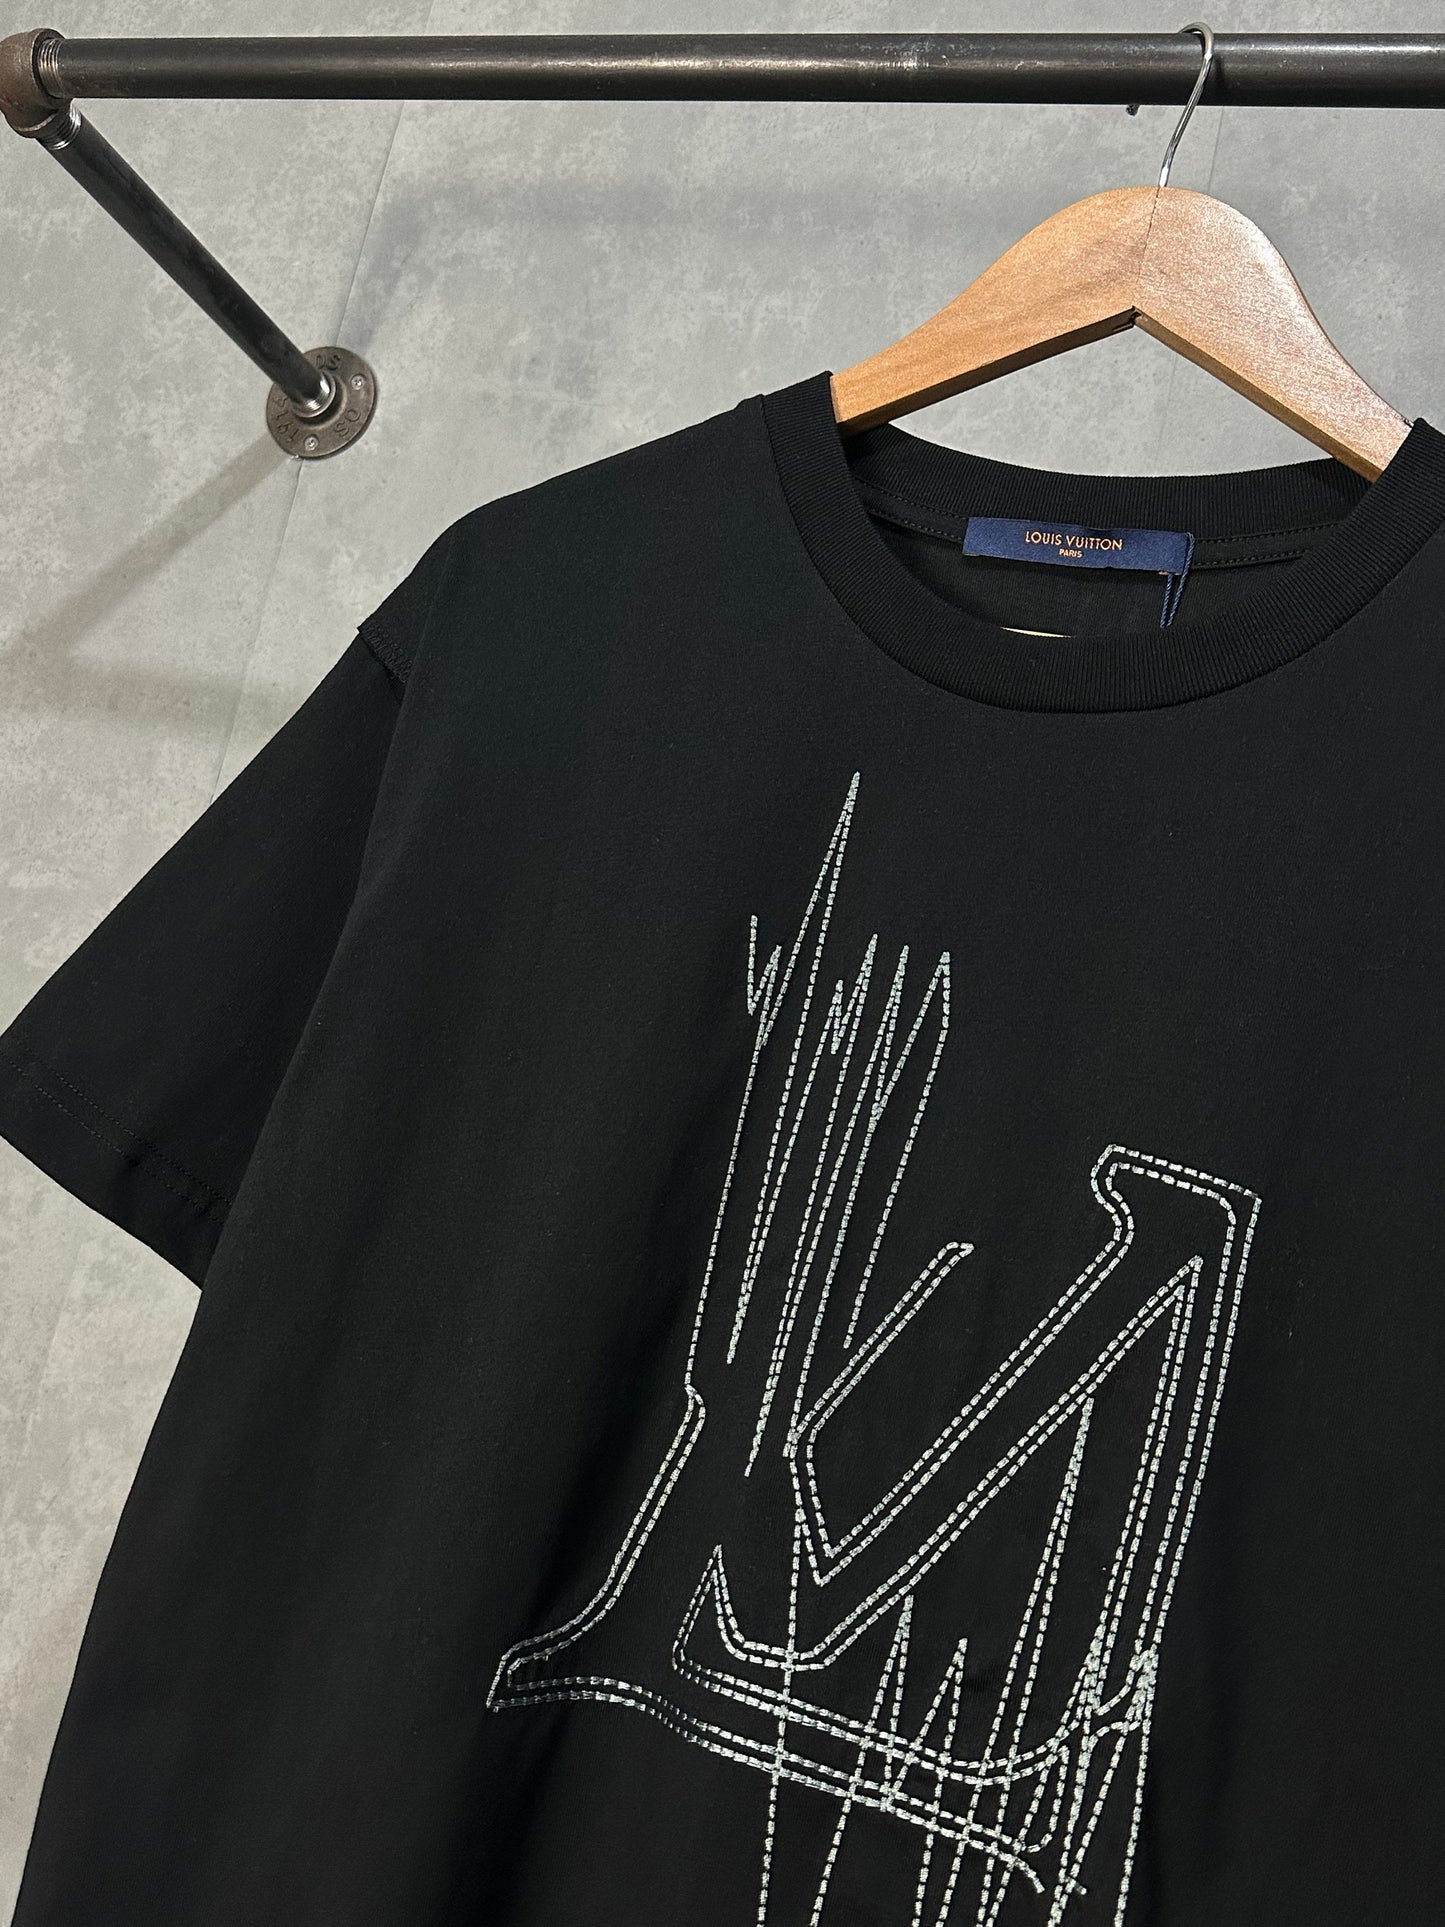 Louis Vuitton Louis Vuitton Black Frequency Embroidered T-Shirt